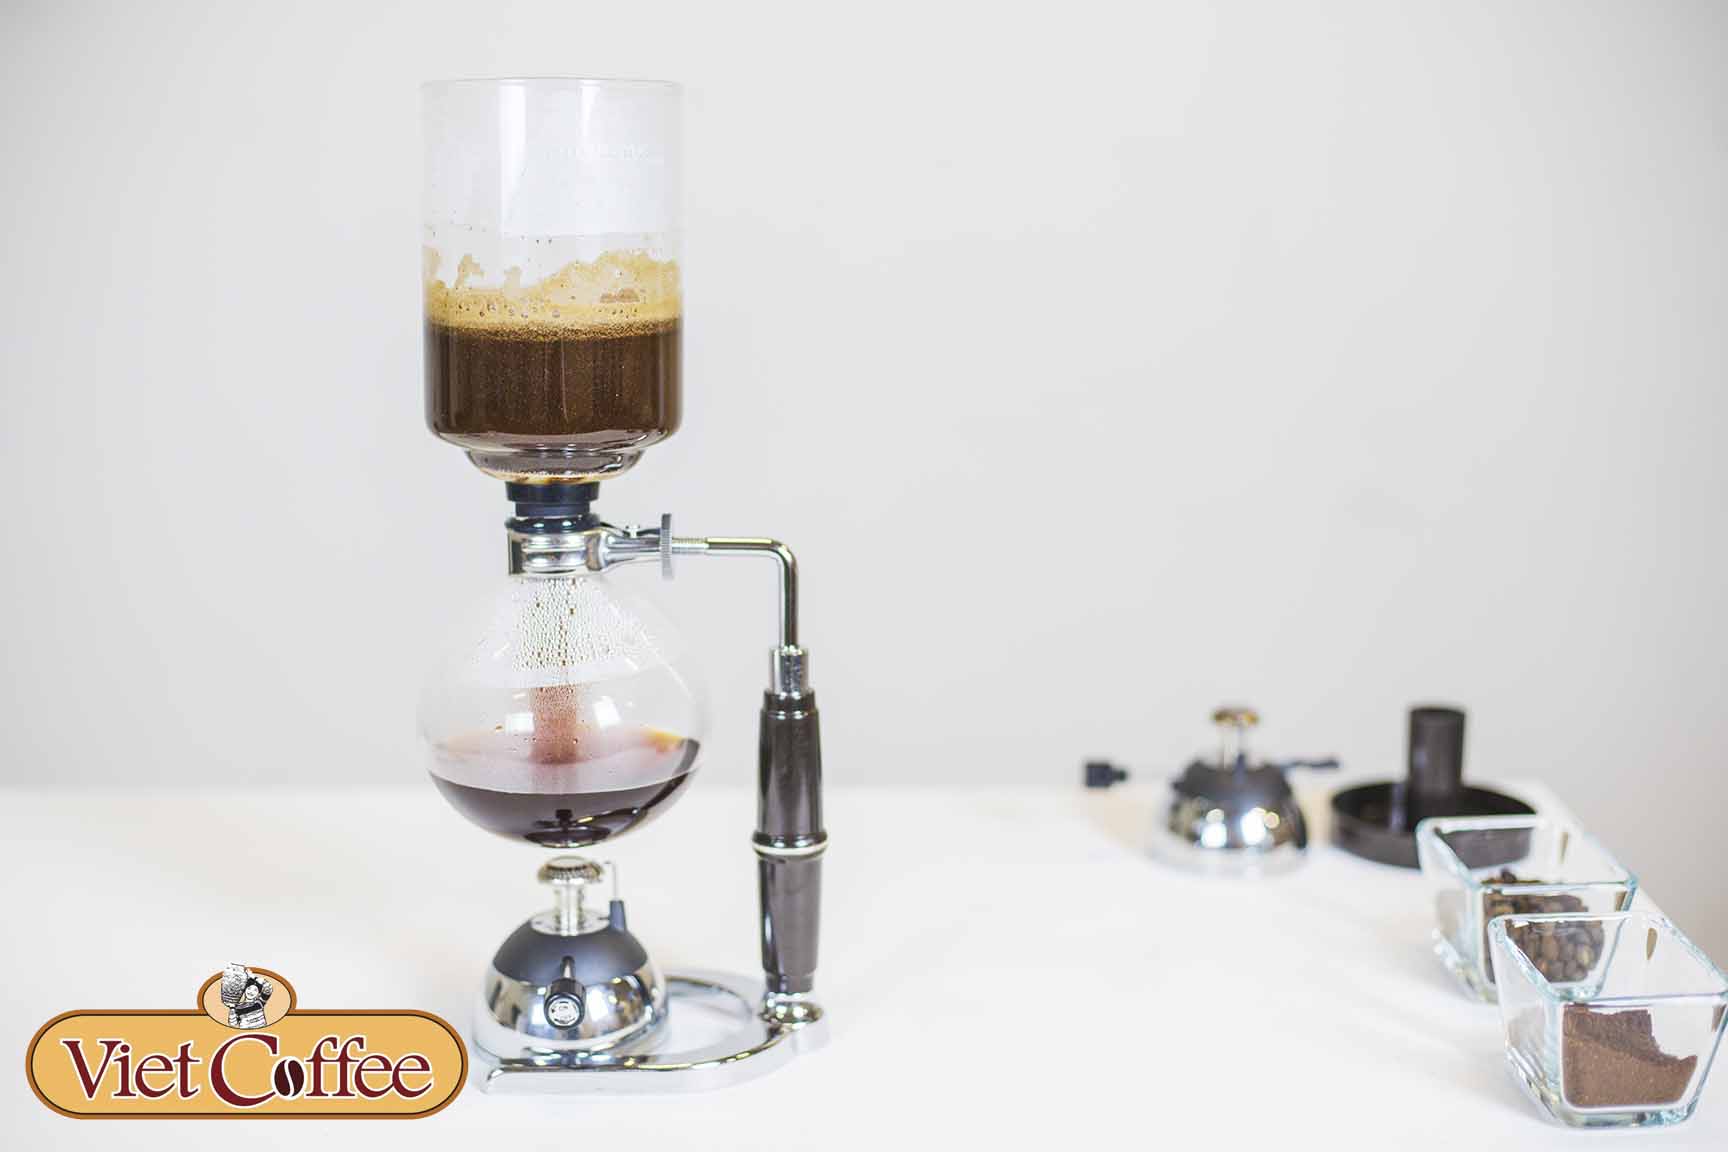 Making coffee by Syphon